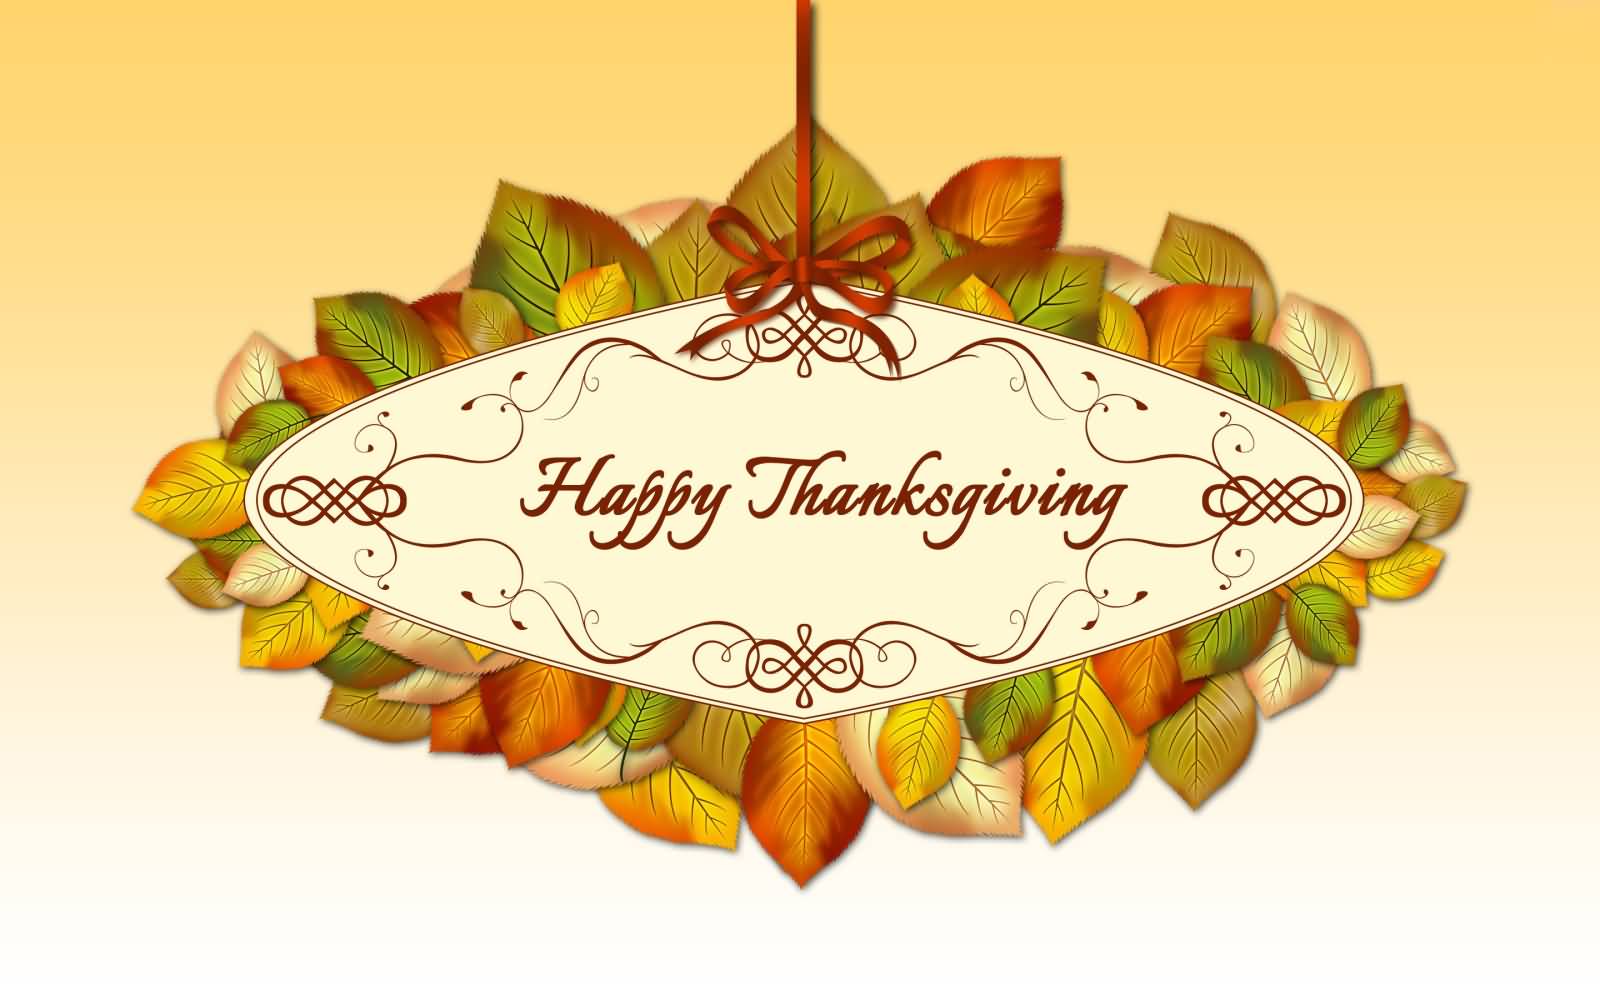 Happy Thanksgiving Awesome Greeting Card